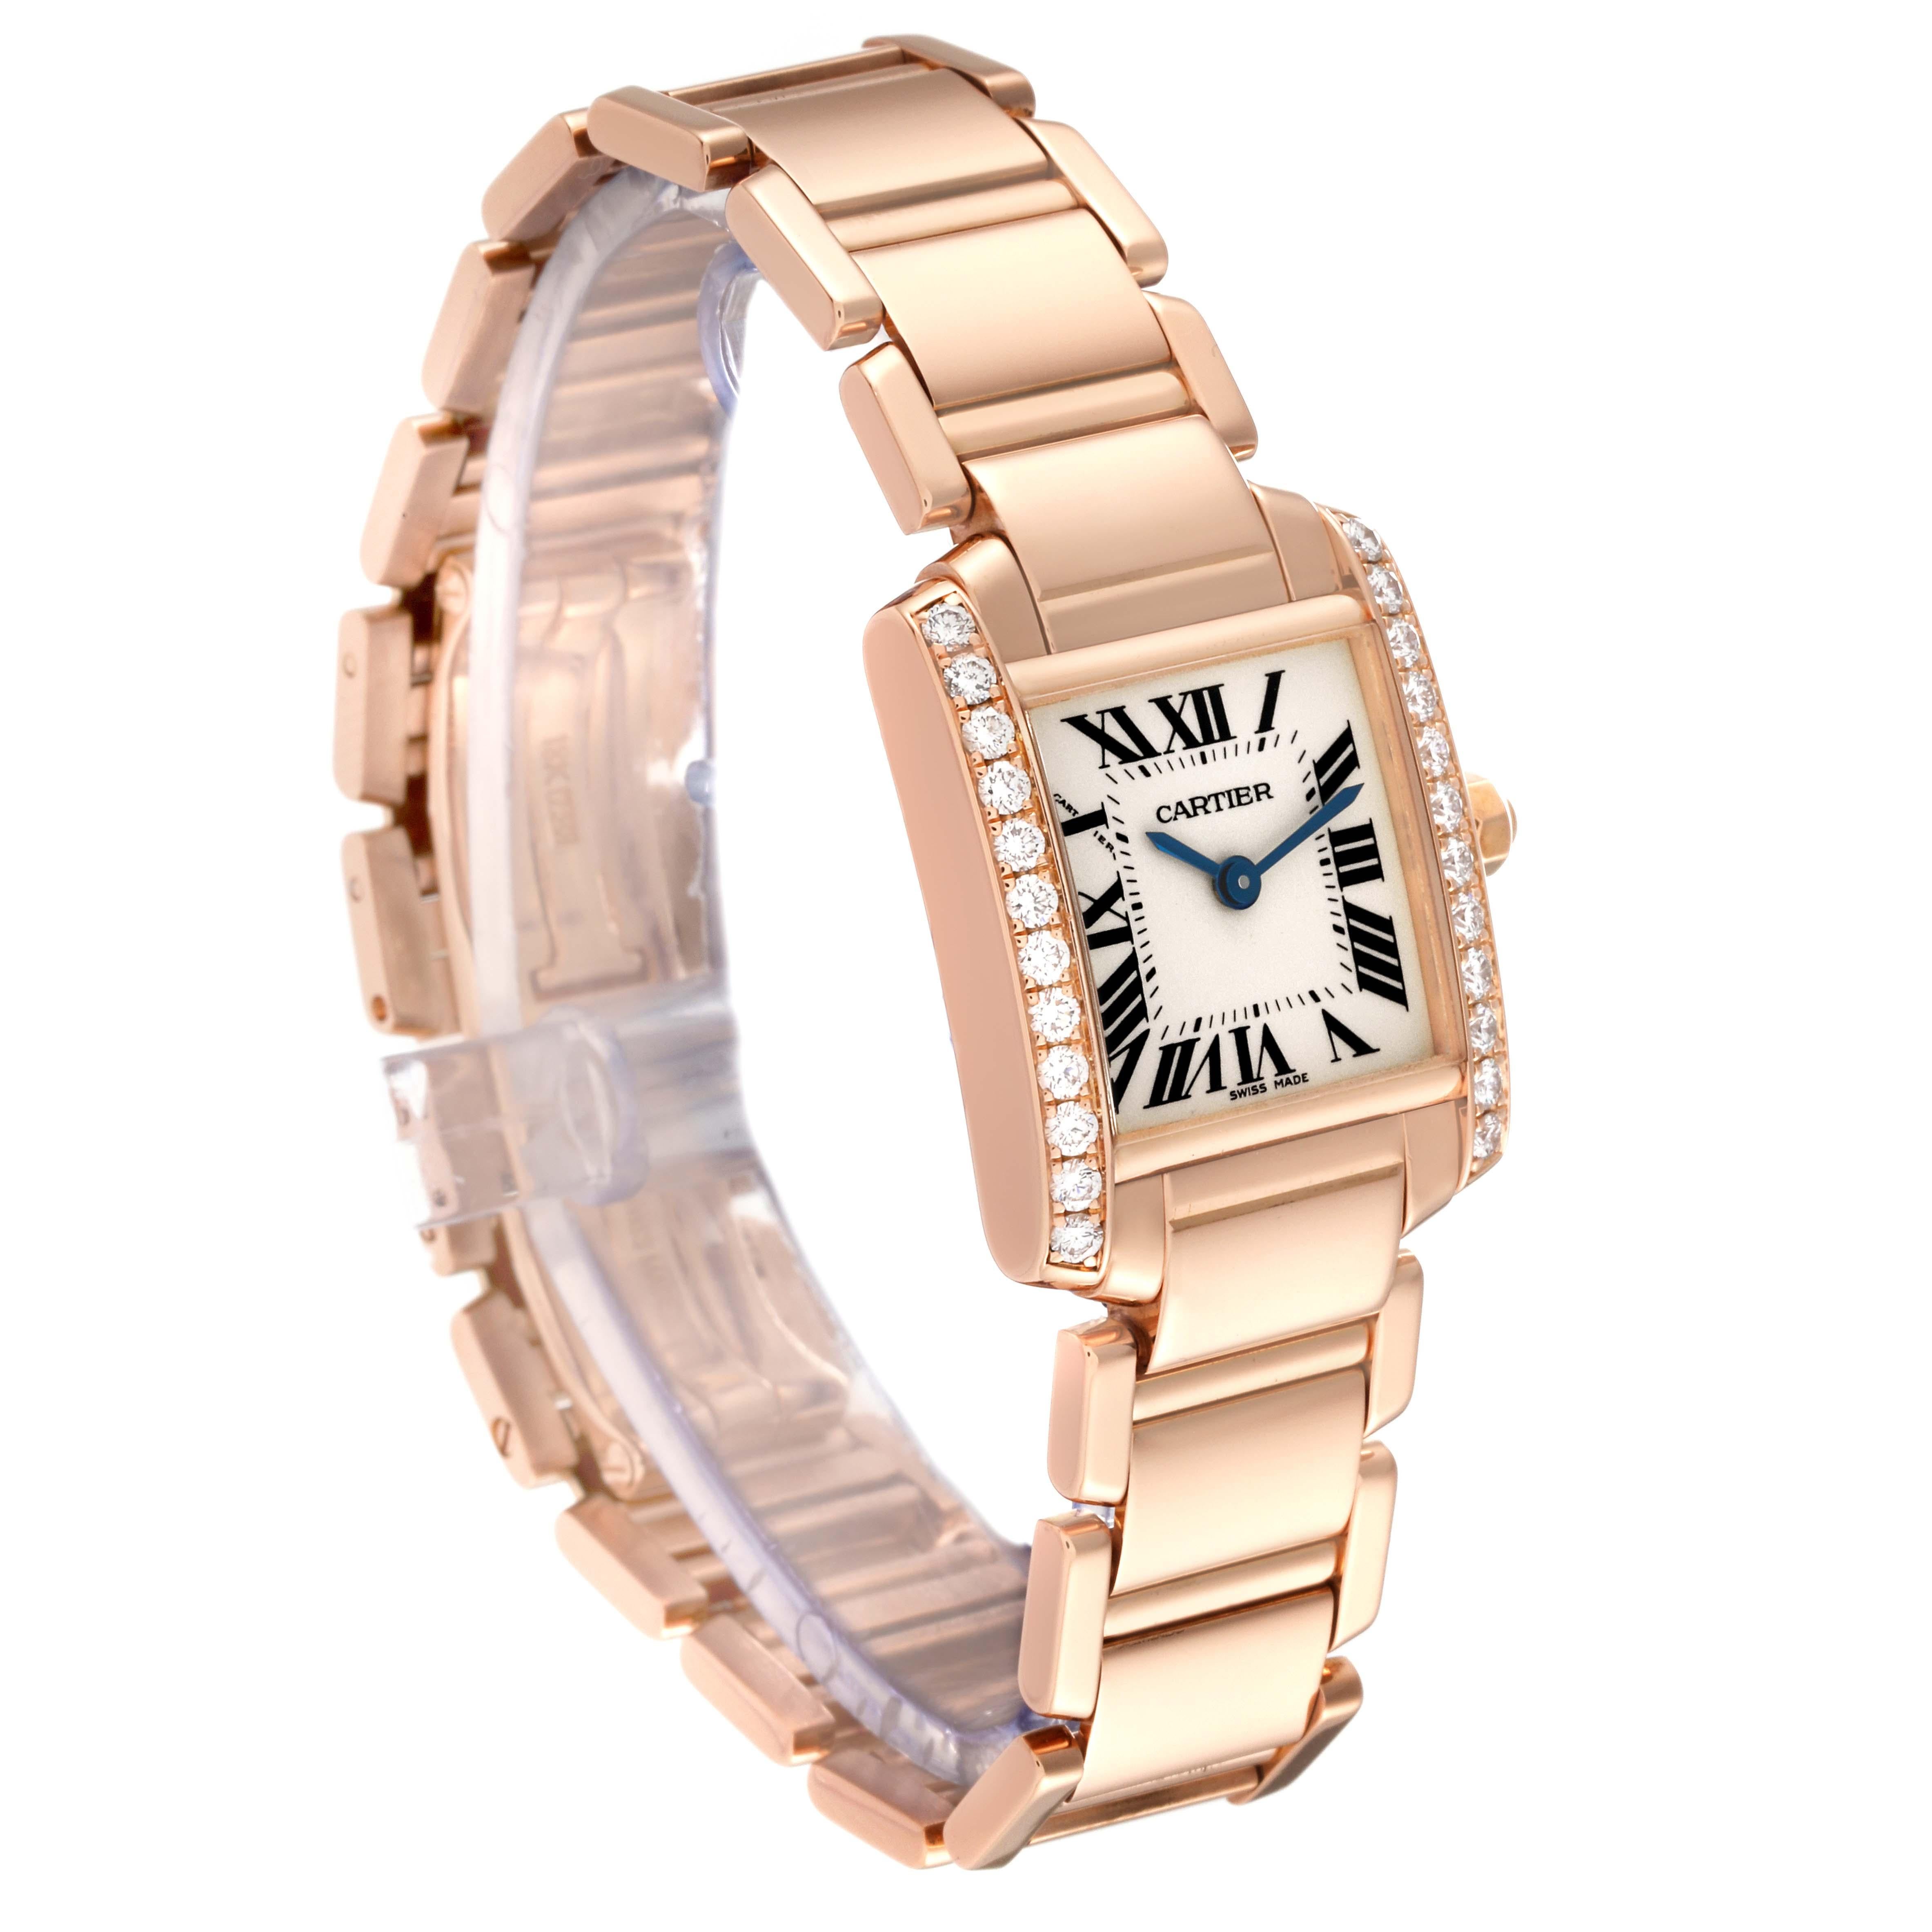 Cartier Tank Francaise Small Rose Gold Diamond Ladies Watch WE10456H In Excellent Condition For Sale In Atlanta, GA